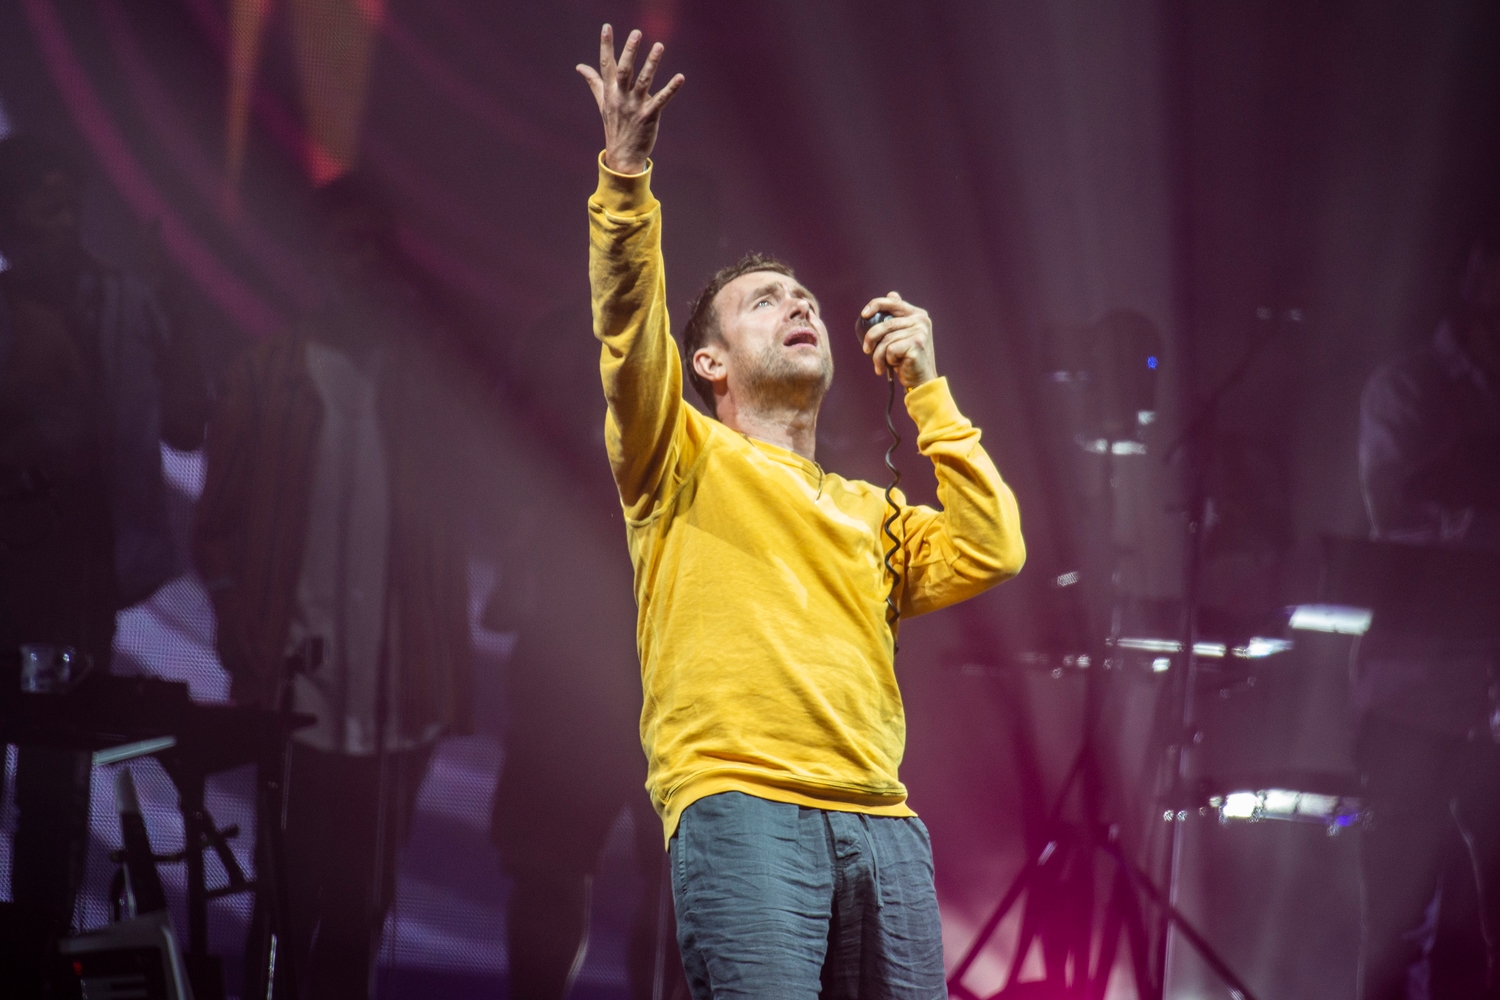 Gorillaz, Brockhampton, Nils Frahm and more kick off an eclectic first day at Lowlands 2018